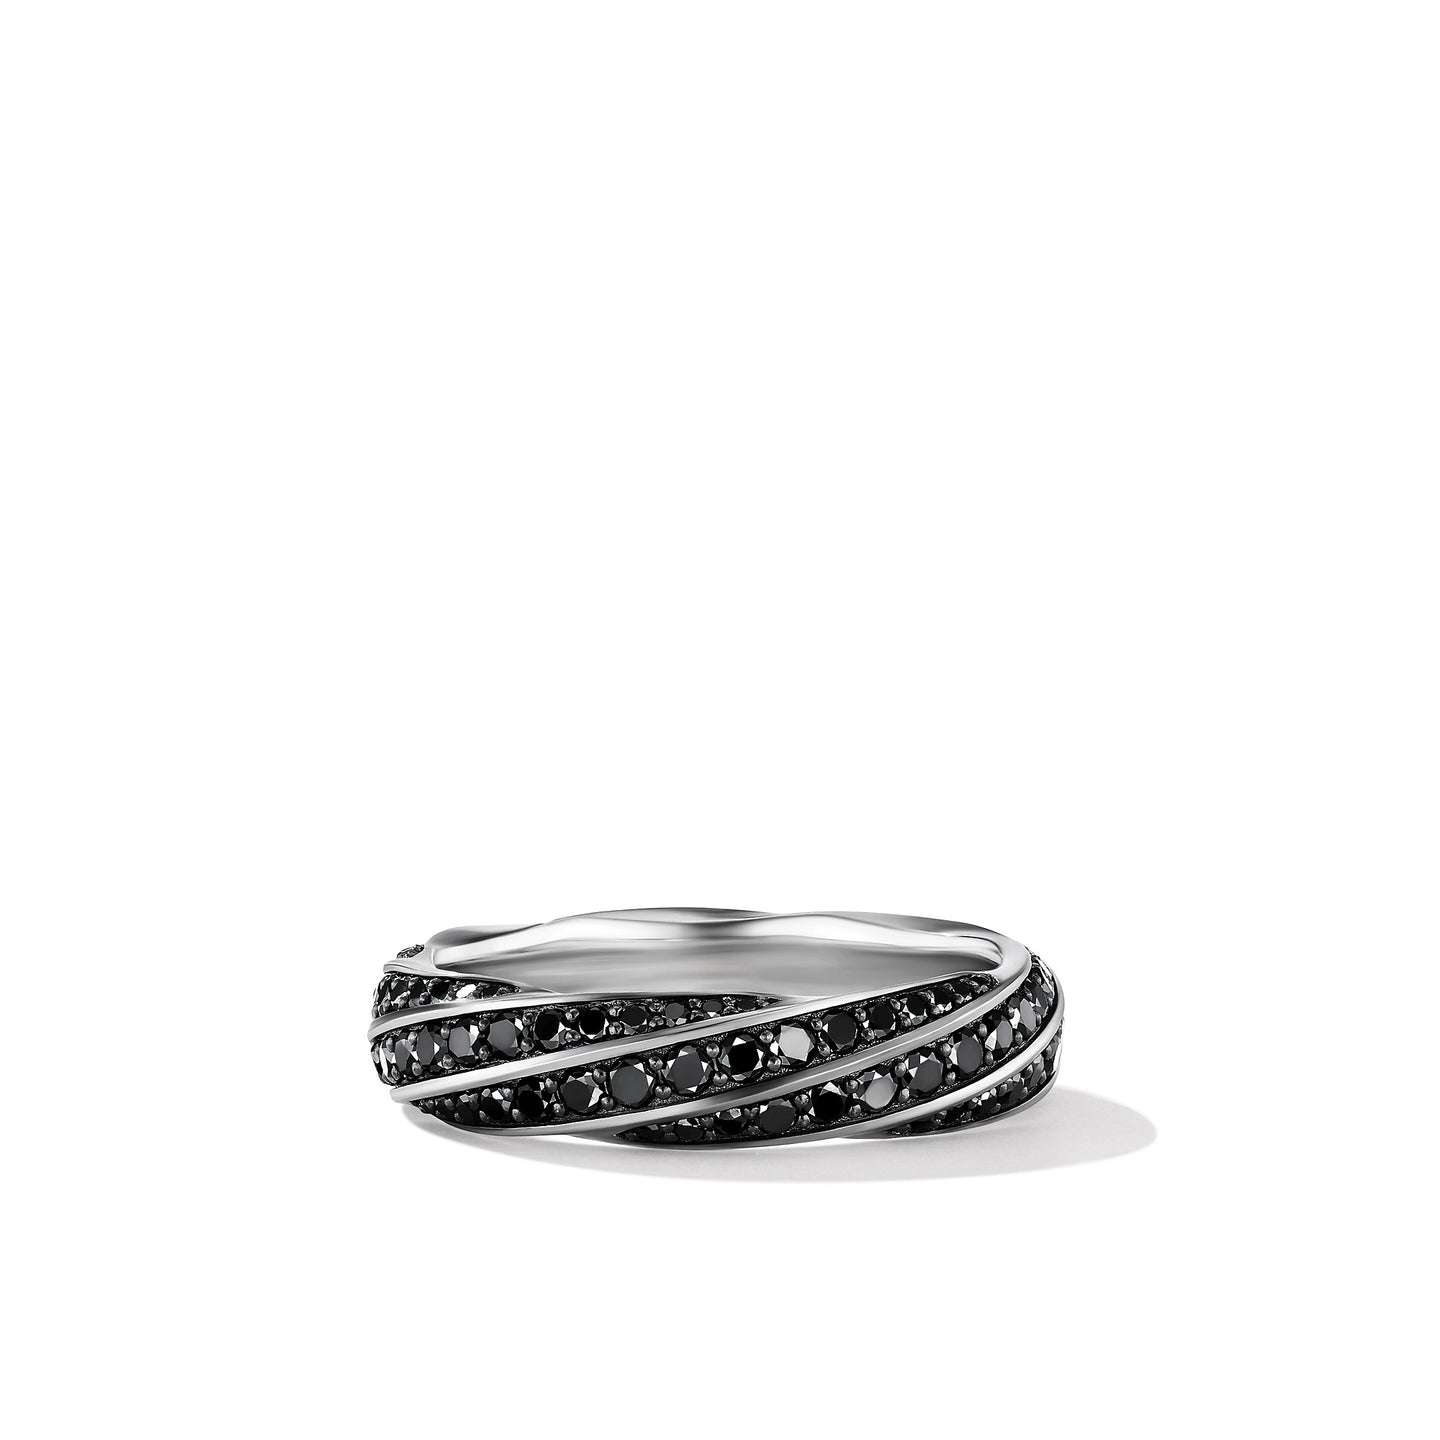 Sterling Silver Cable Edge Band Ring with Black Diamonds